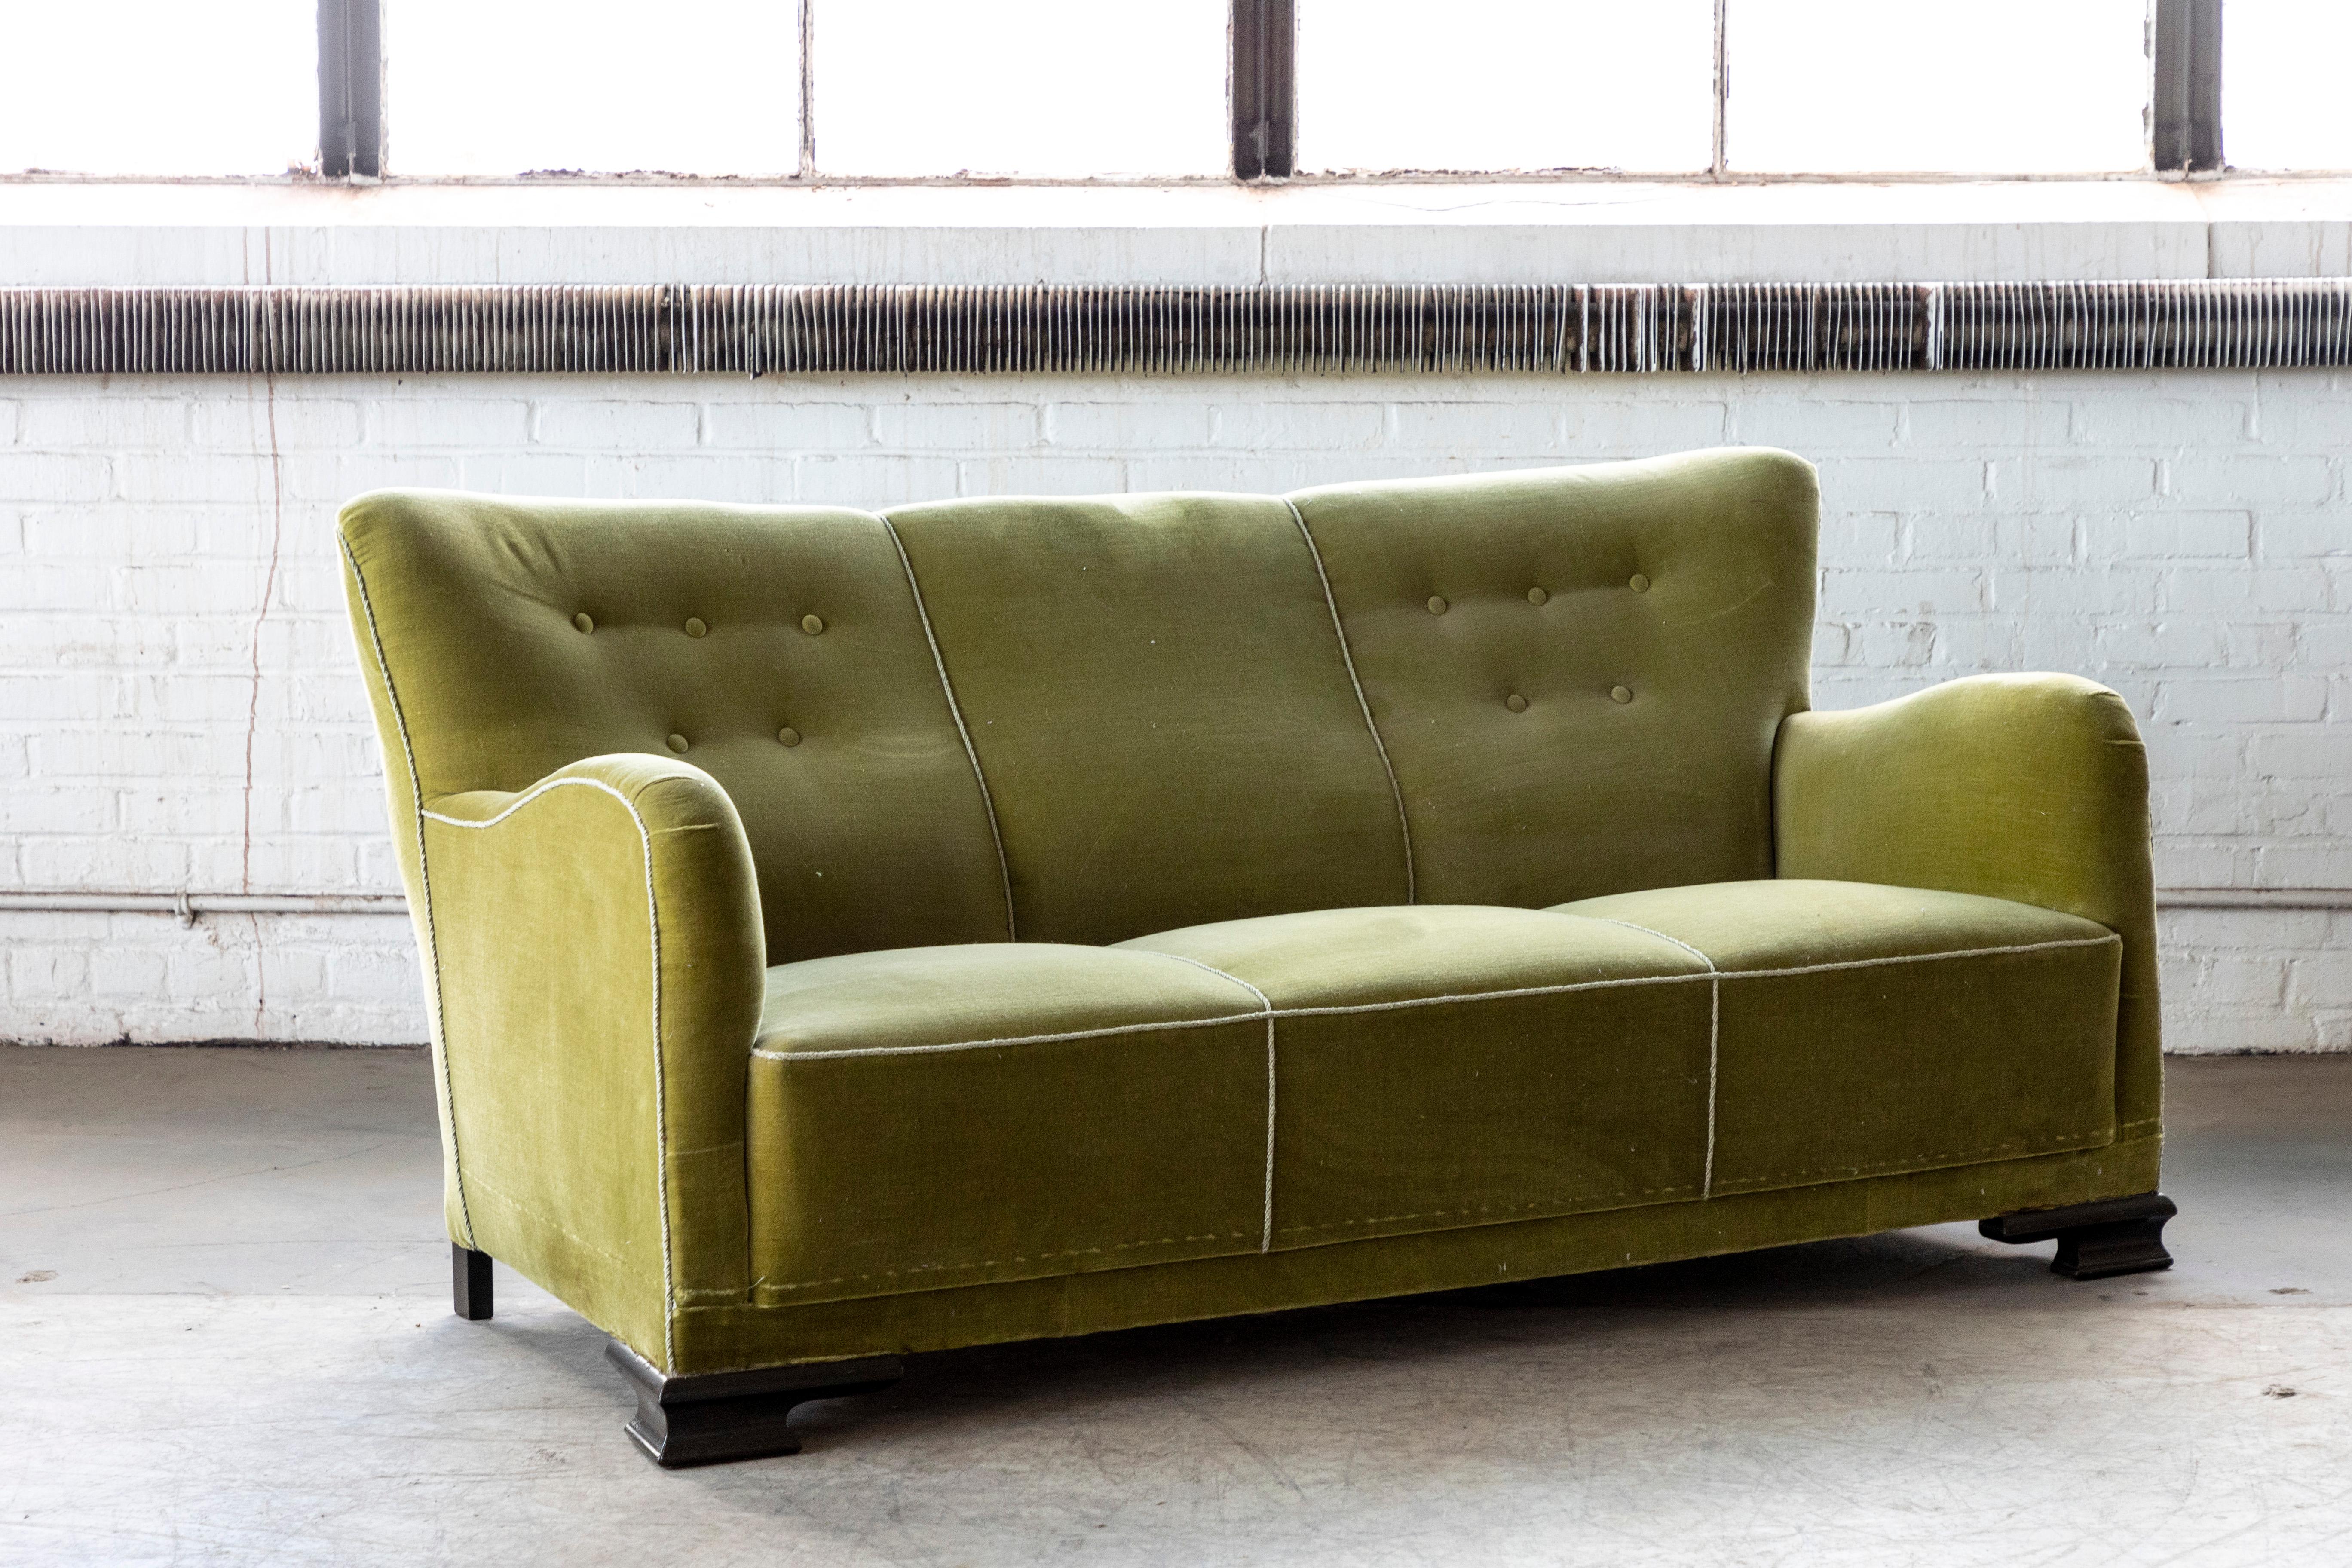 Danish Midcentury Sofa in Green Mohair with Art Deco Legs For Sale 2